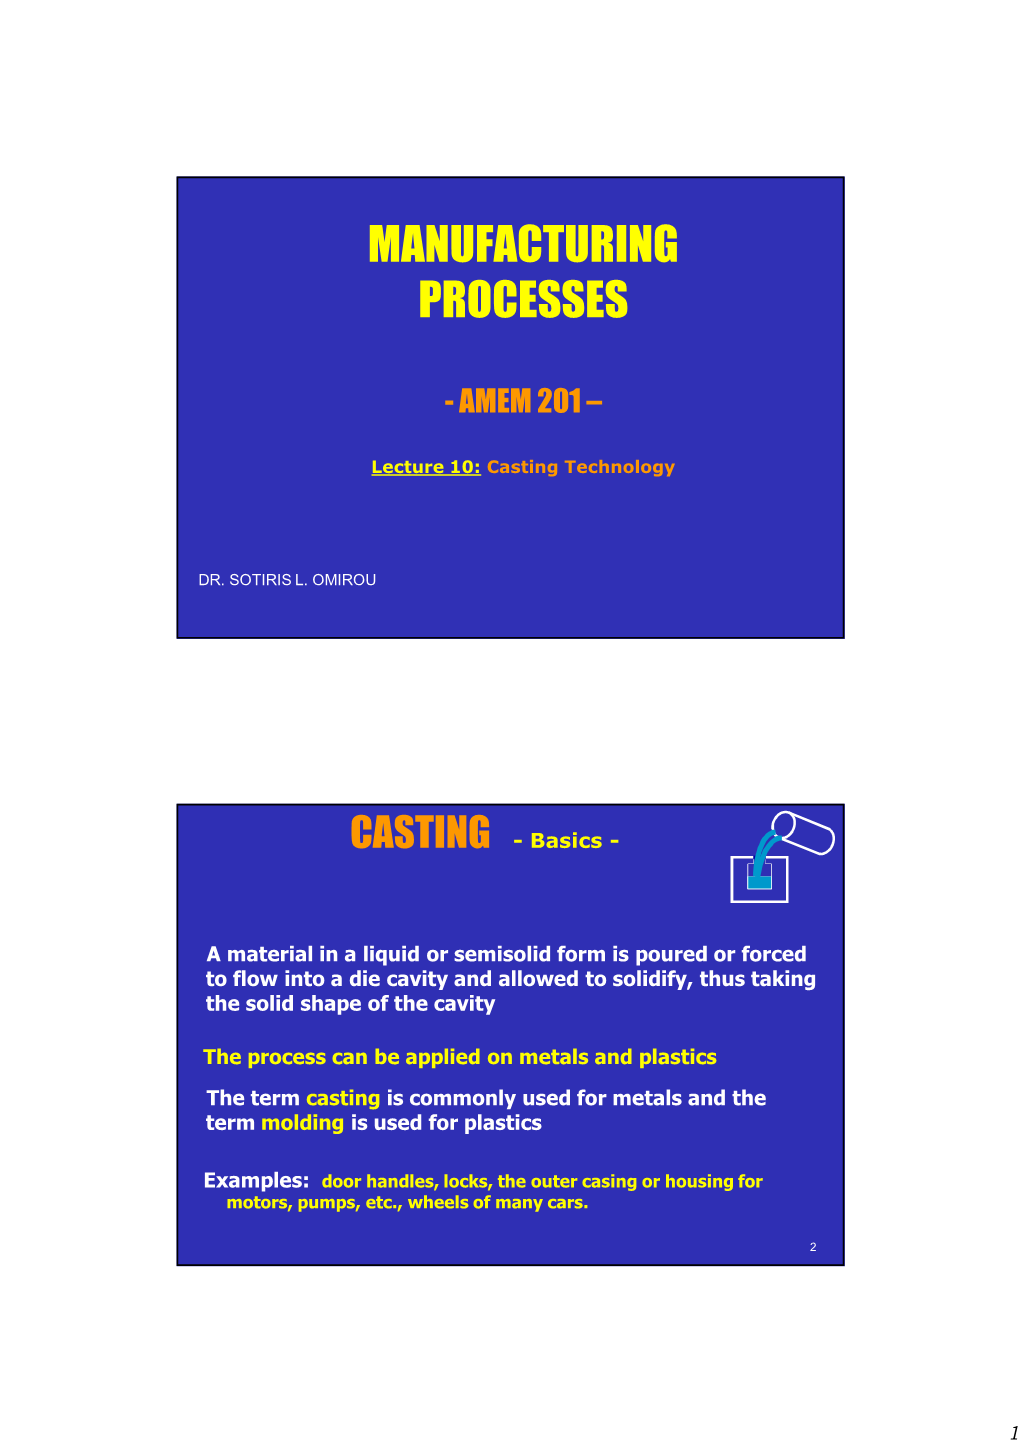 Lecture 10: Casting Technology